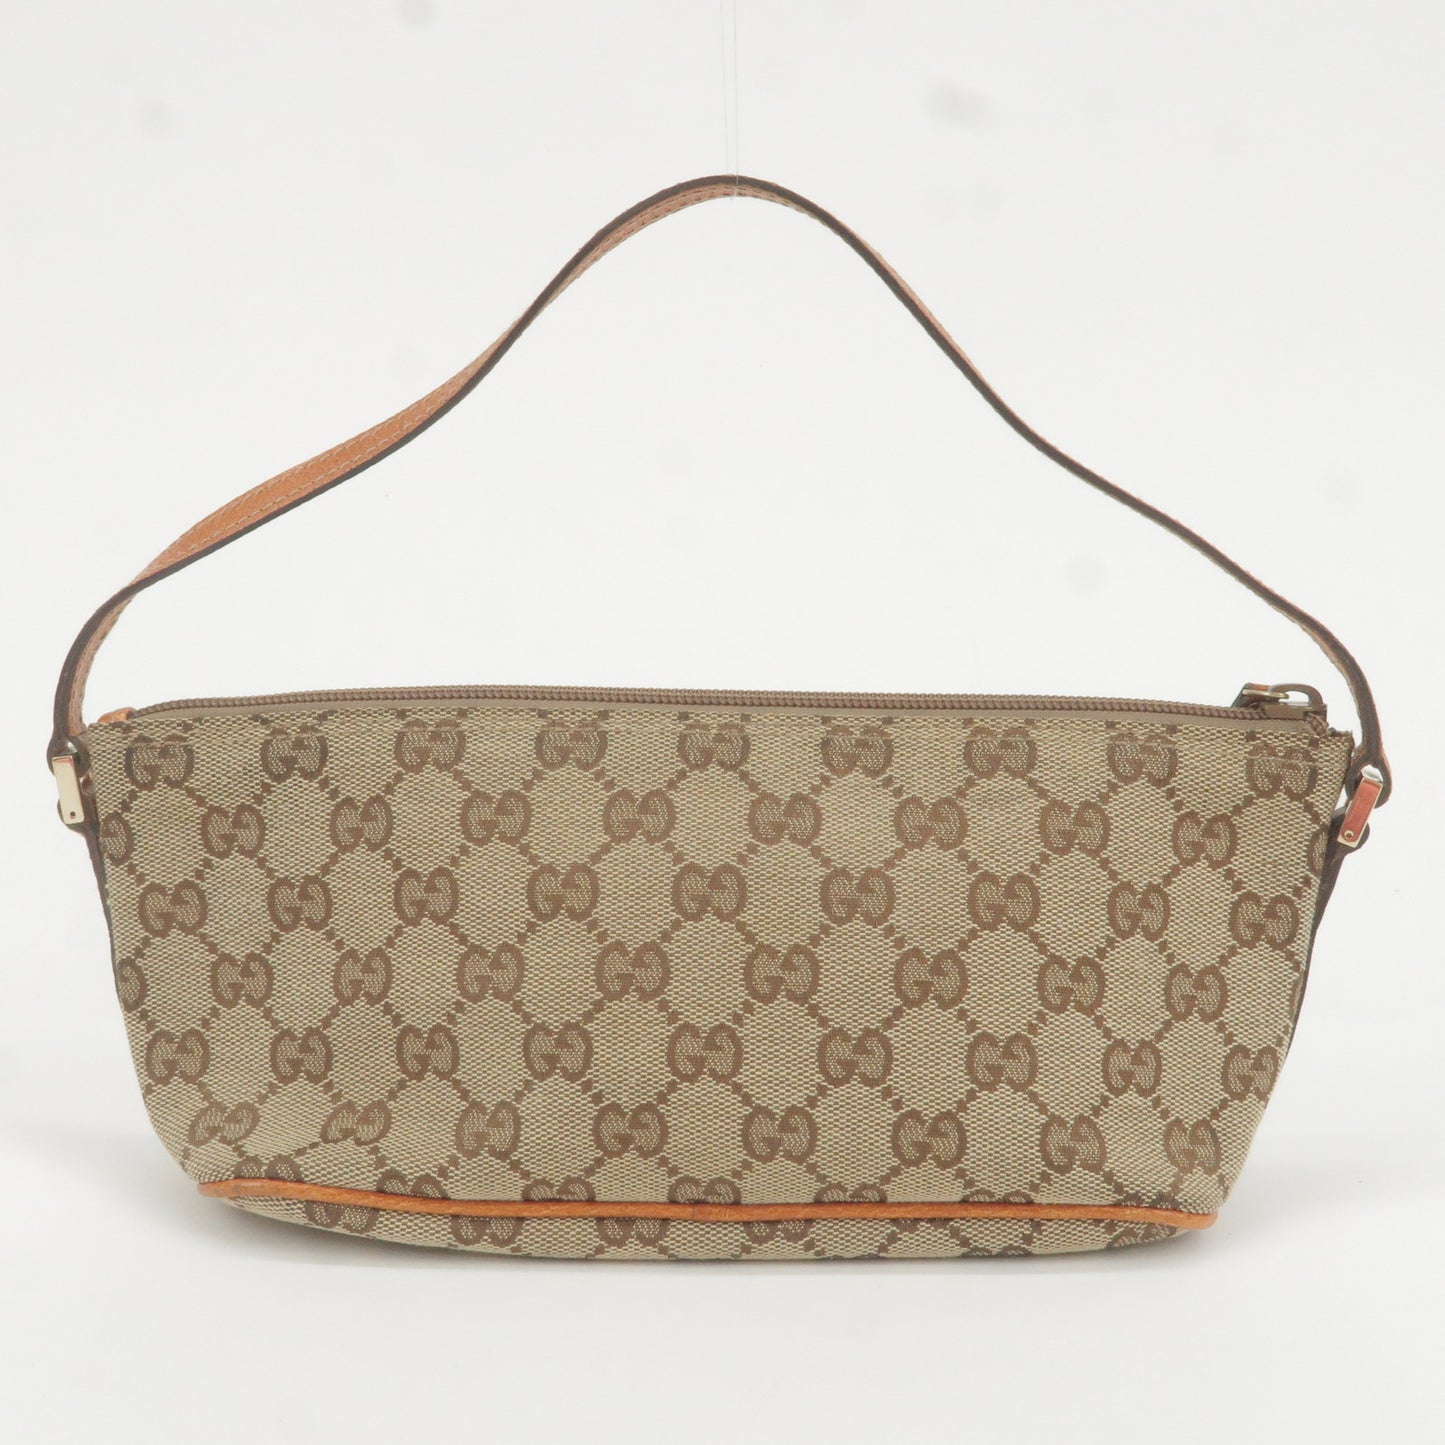 GUCCI Boat Bag GG Canvas Leather Hand Bag Brown Beige 07198